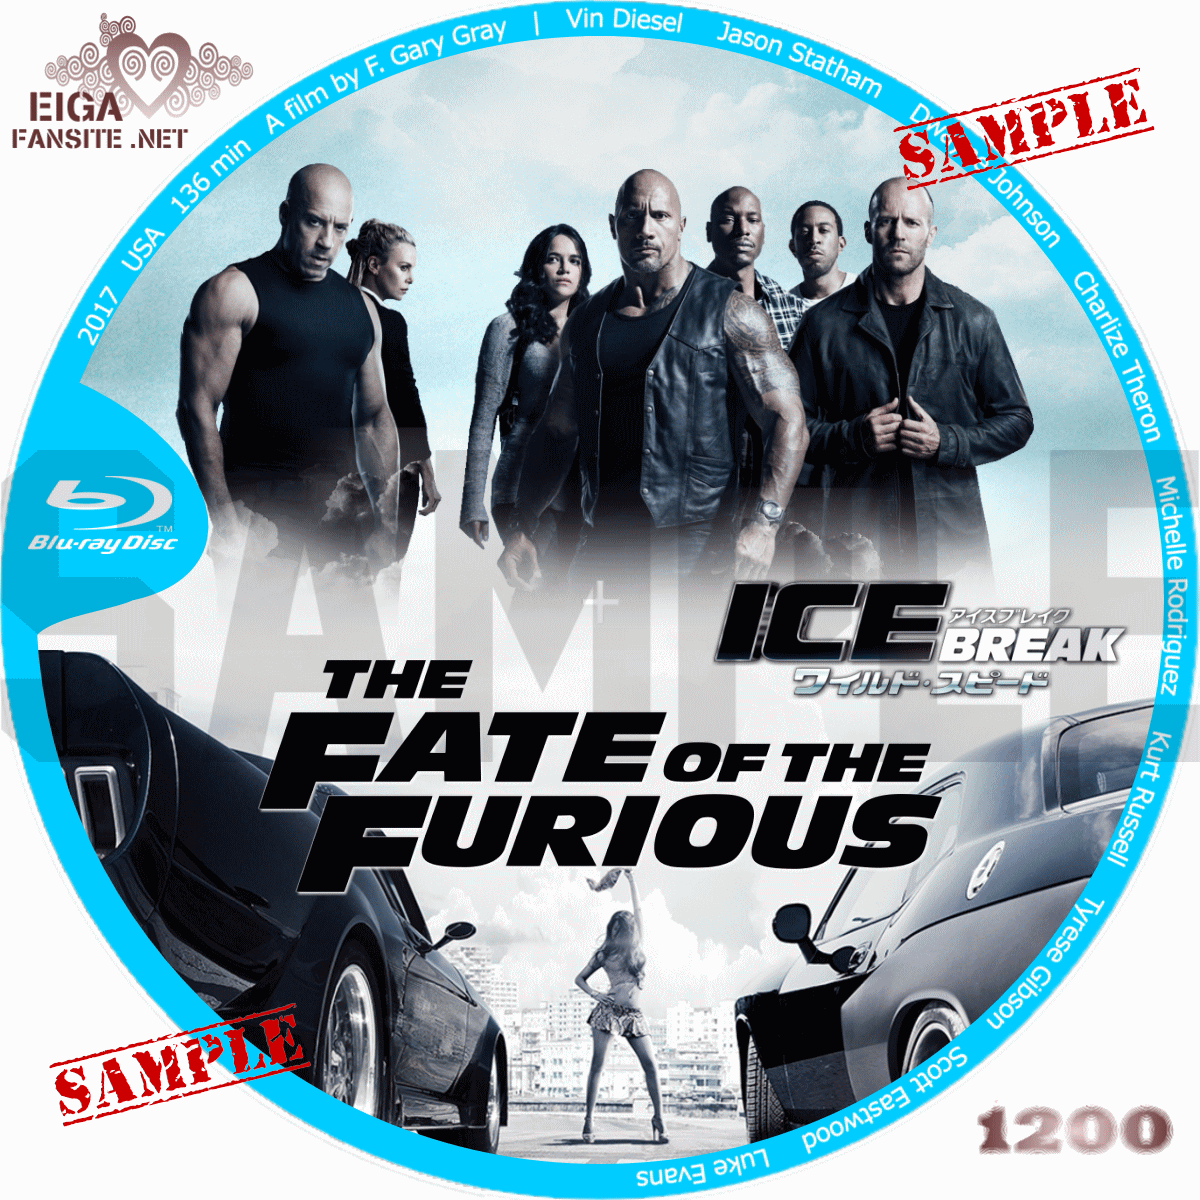 The Fate of the Furious instaling